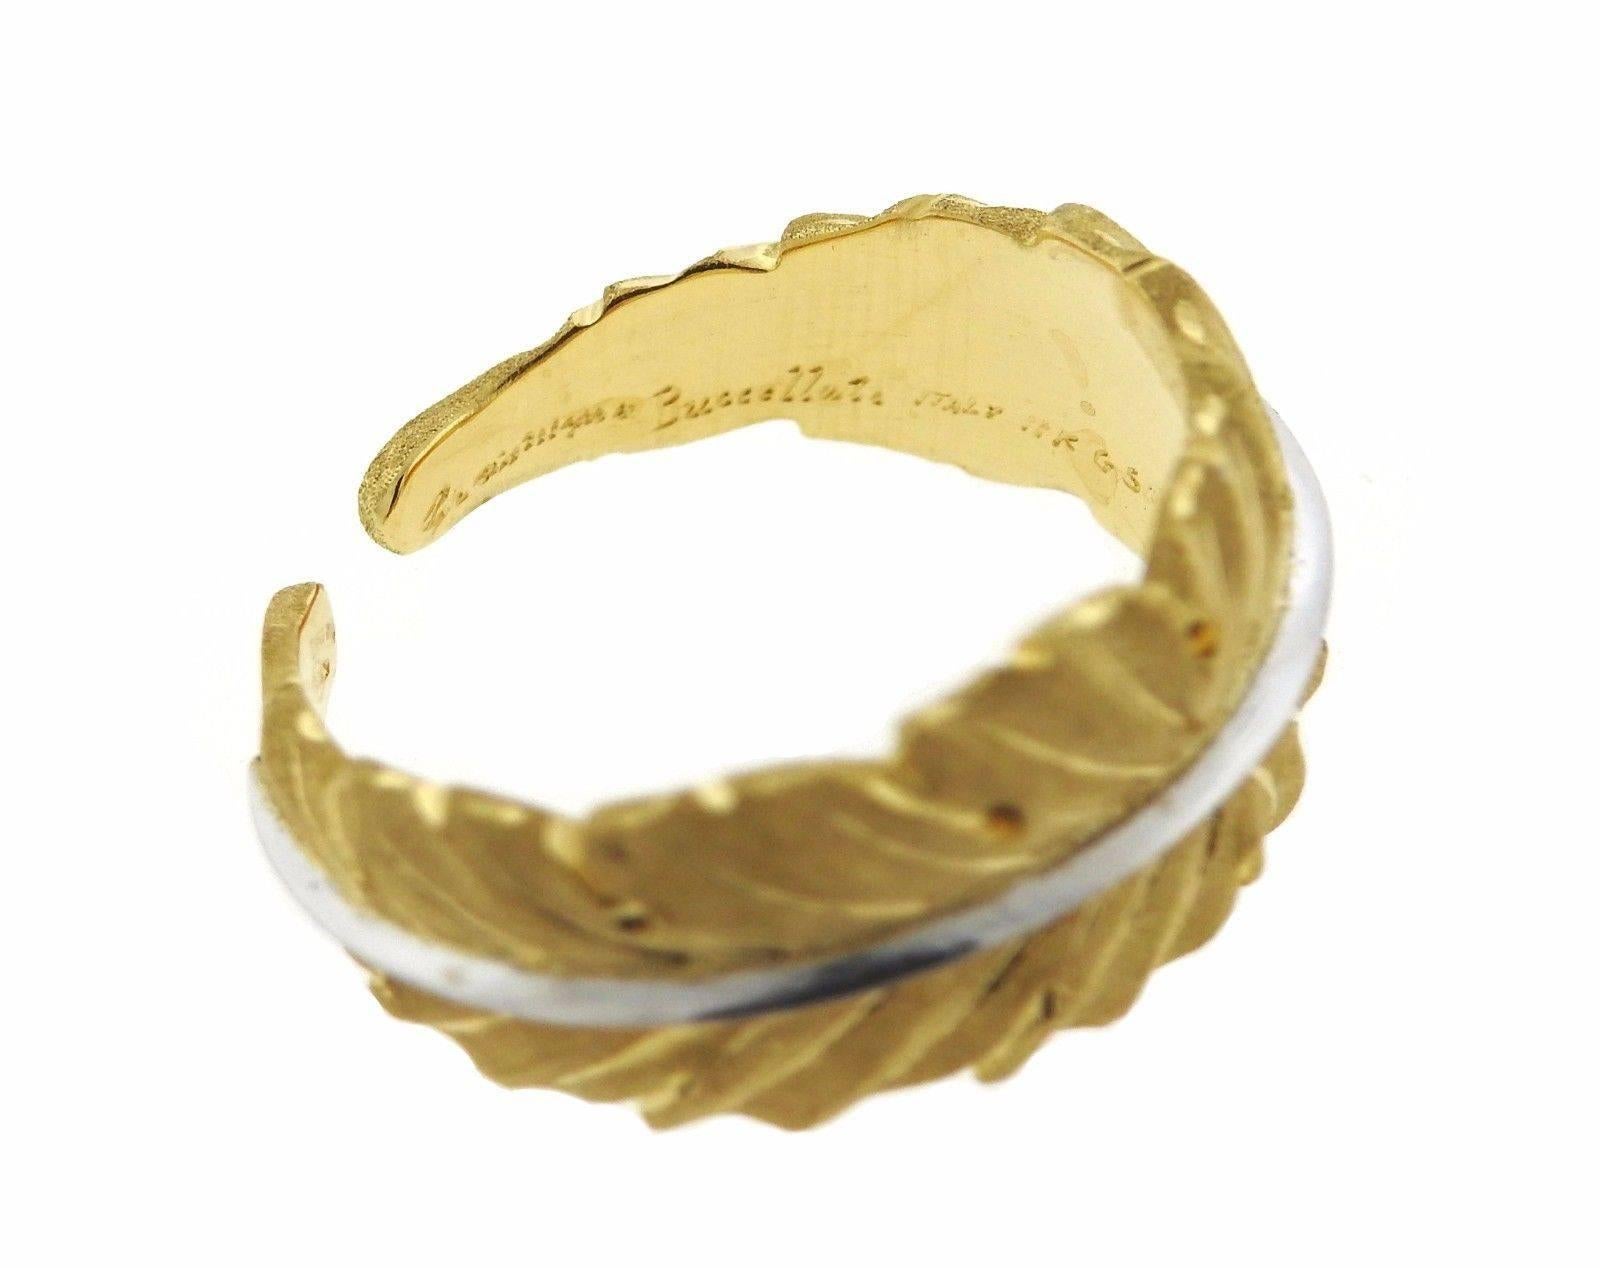 An 18k yellow and white gold leaf motif ring.  The ring is a size 7 and is 9.1mm wide.  The weight of the piece is 6.3 grams.  Marked: 18k , G5084,  Gianmaria Buccellati , Italy.  The current retail is $5330.